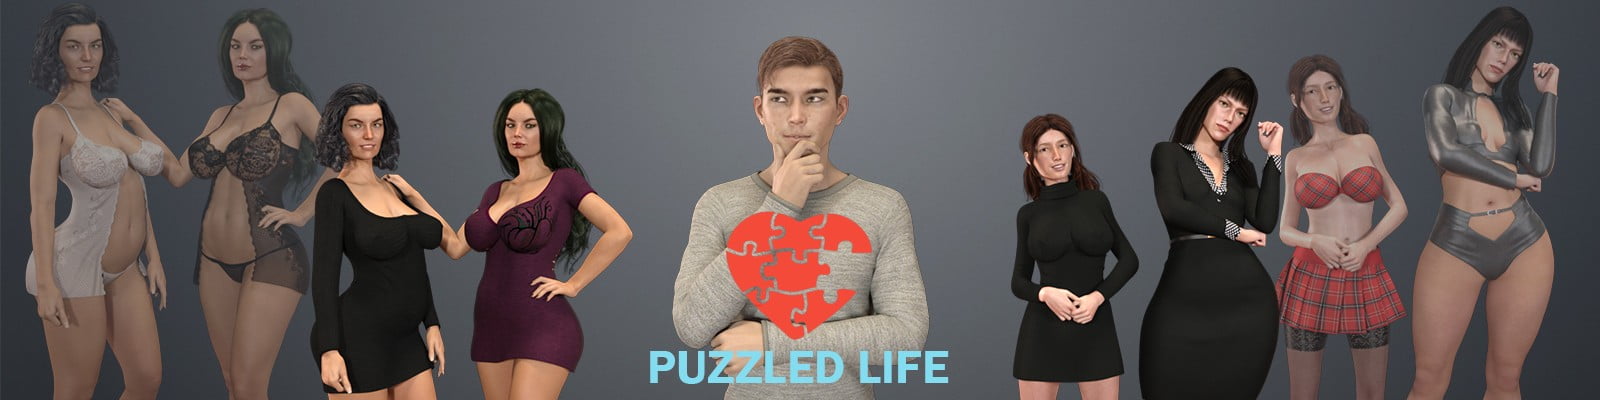 Puzzled Life VincenzoM Adult xxx Game Download